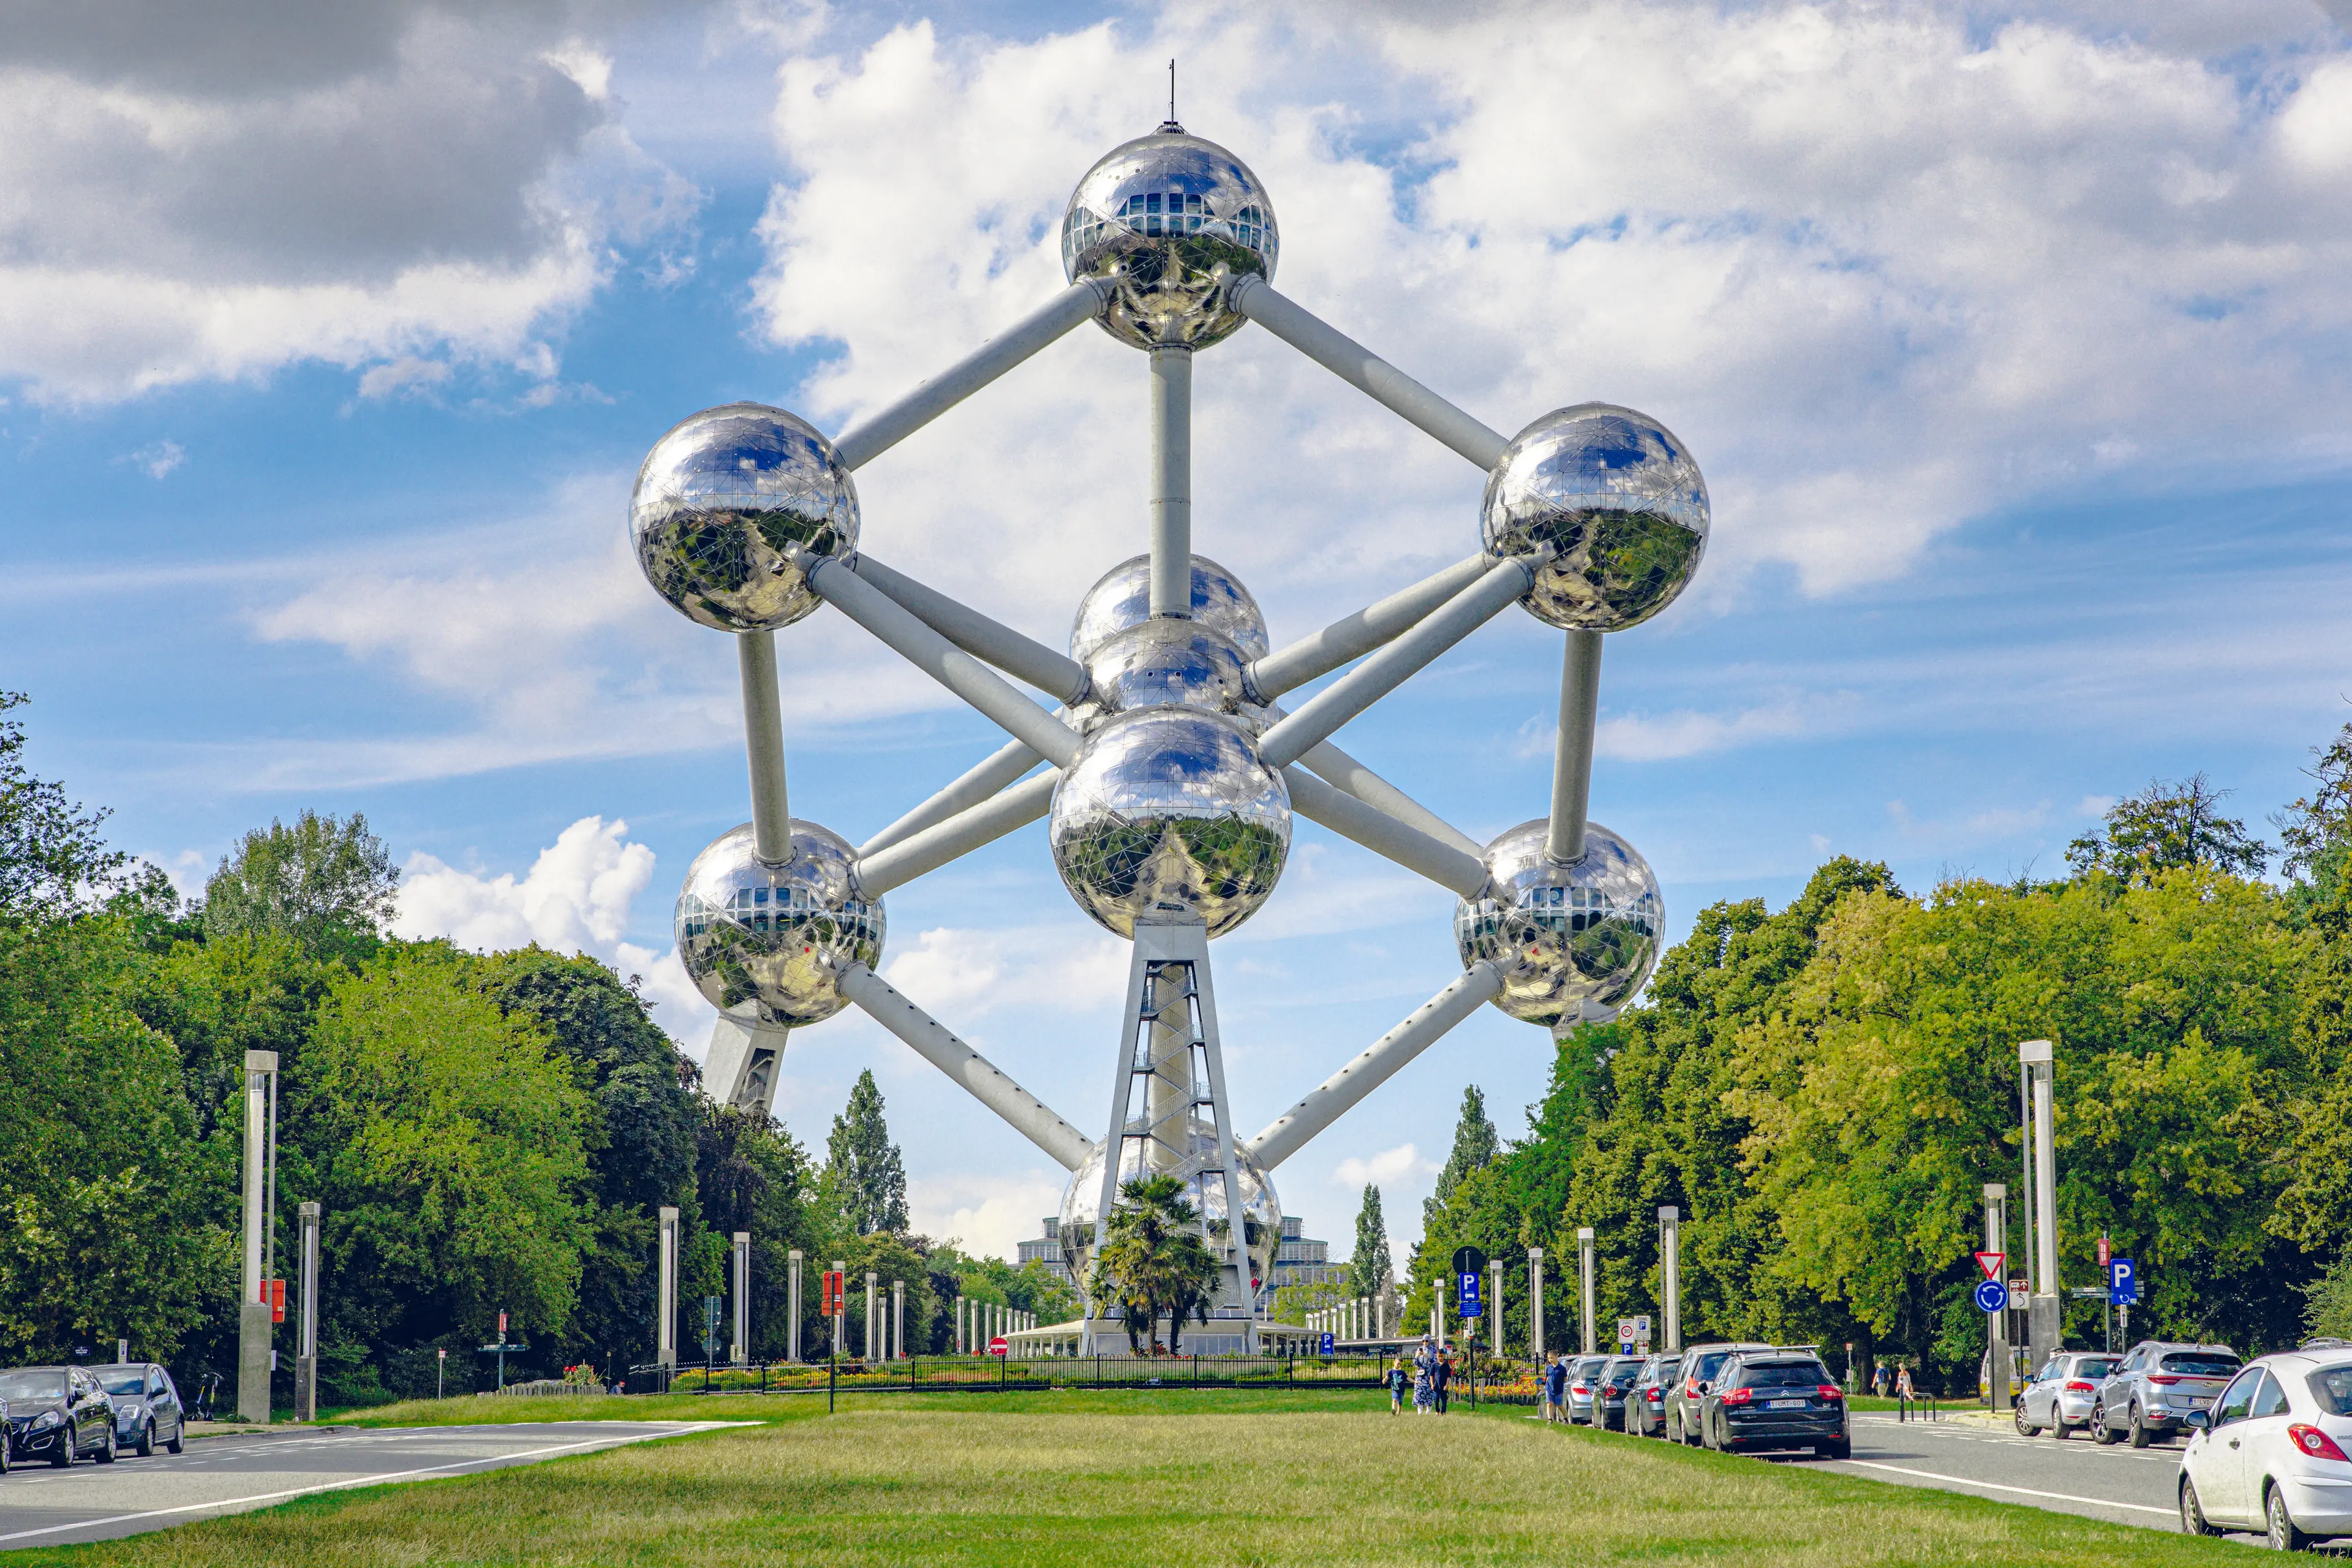 Atomium is a 102 meter tall iron atom model, originally constructed for Expo '58.